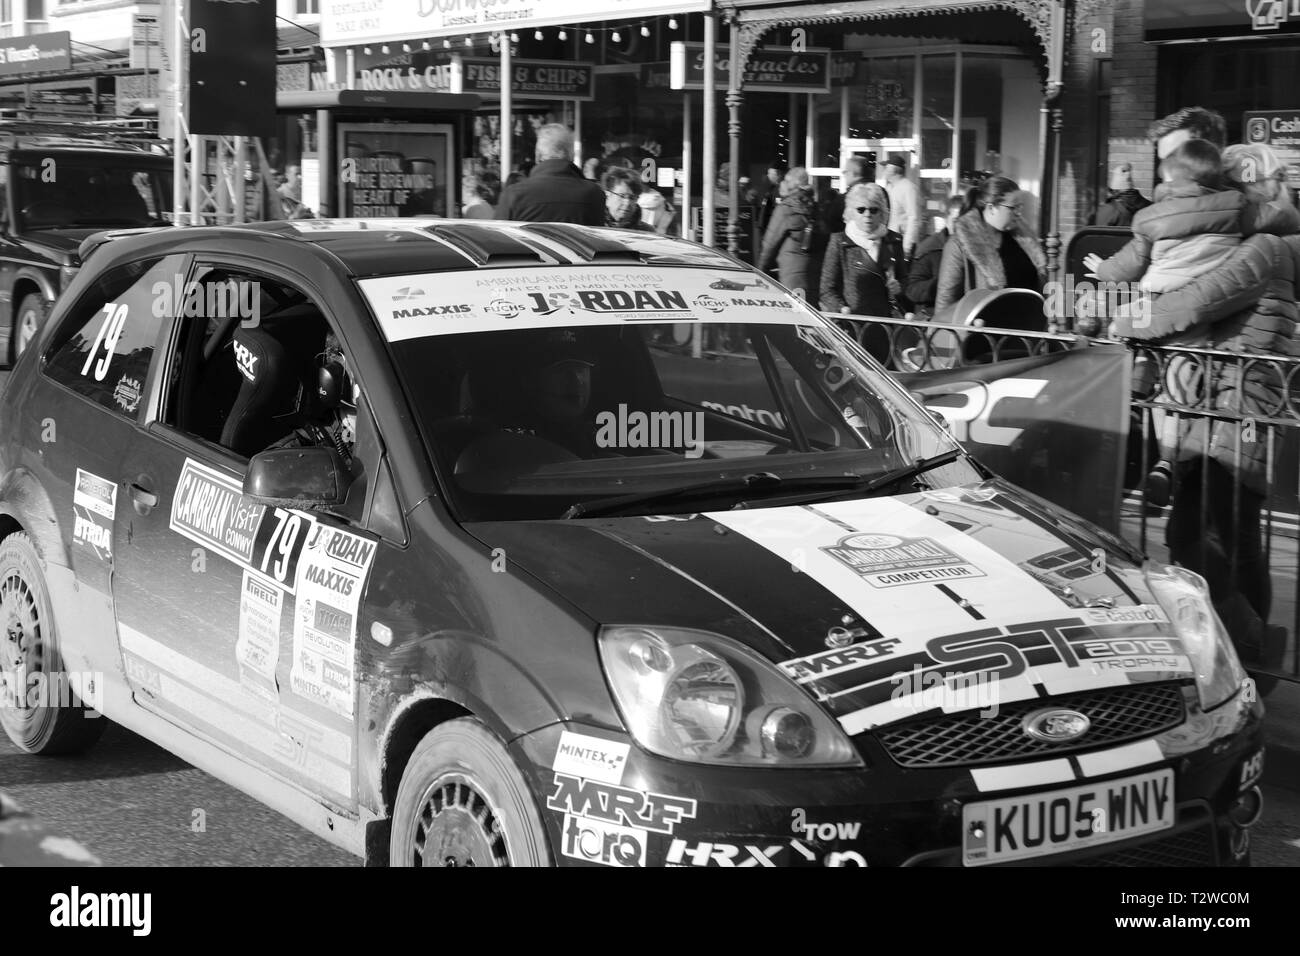 Cambrian rally, Llandudno, Wales. the images are taken in monochrome Stock Photo